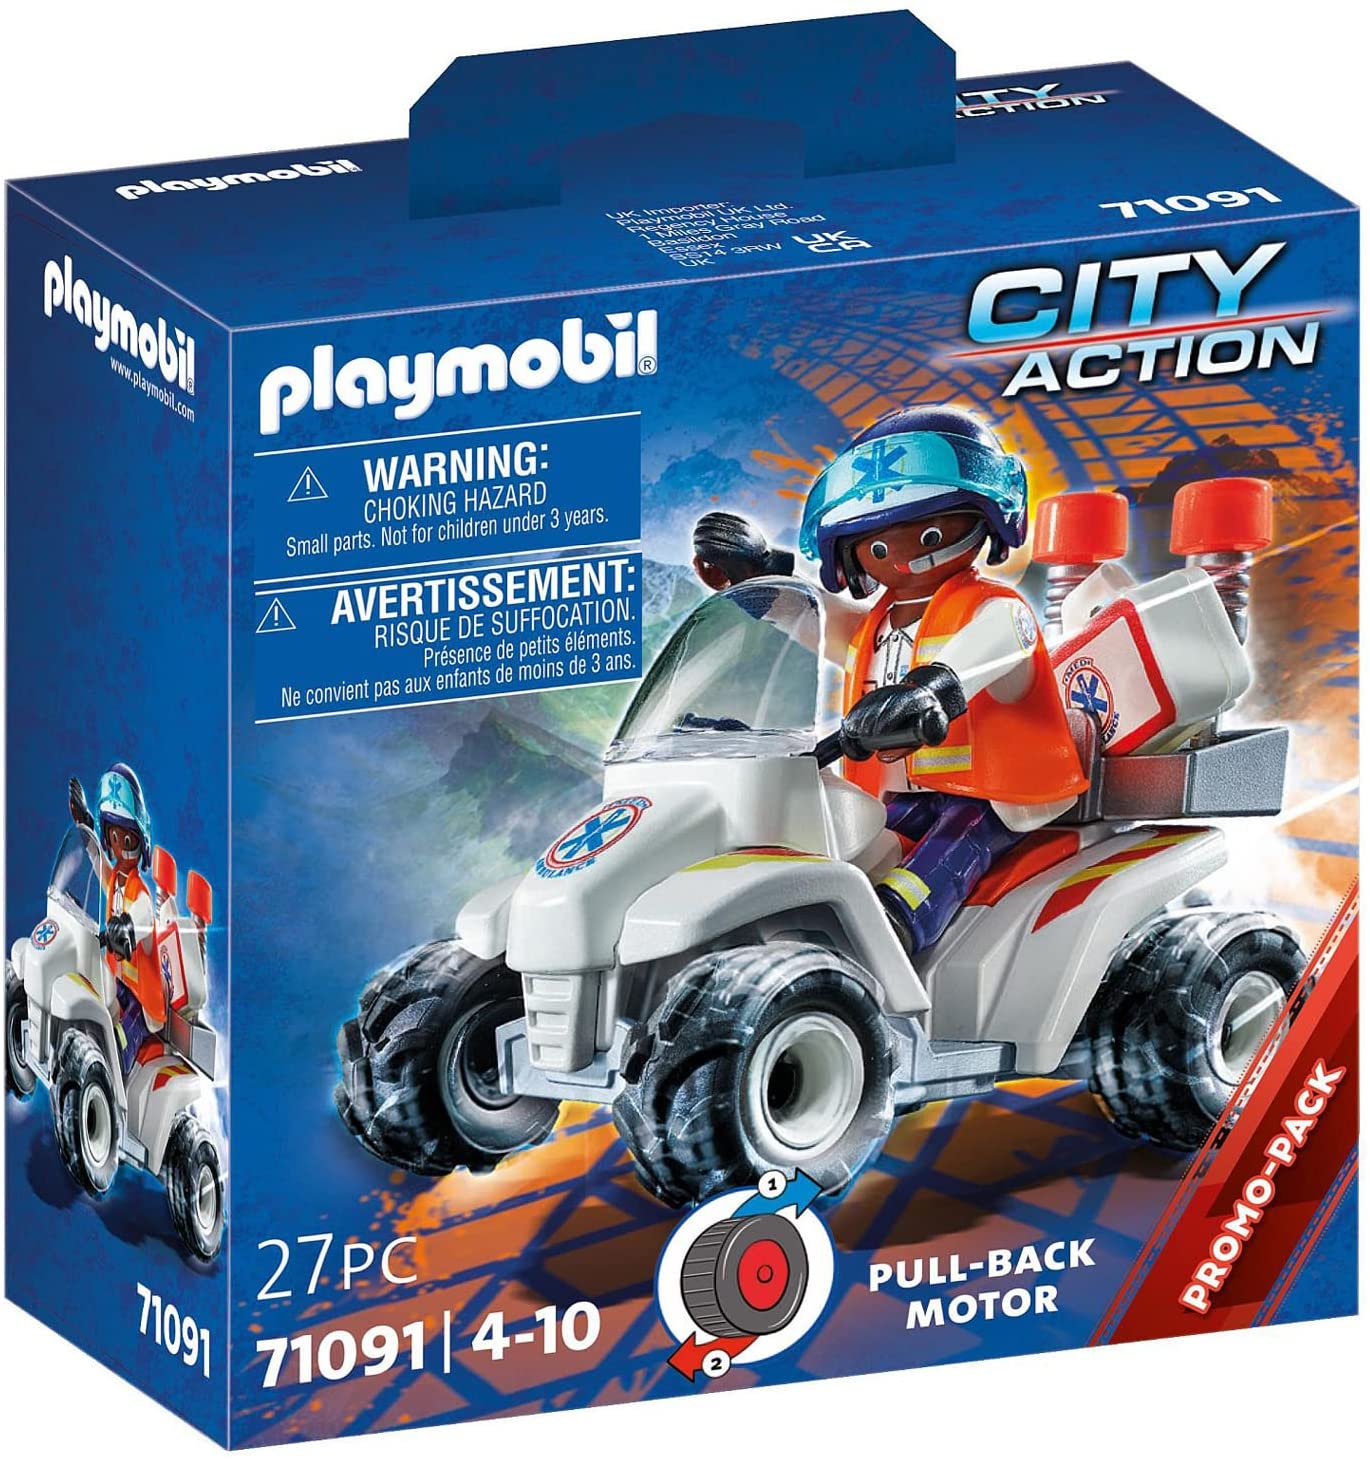 PLAYMOBIL City Action 71091 Rescue Speed Quad with Pull-Back Motor for Ages 4 and Up